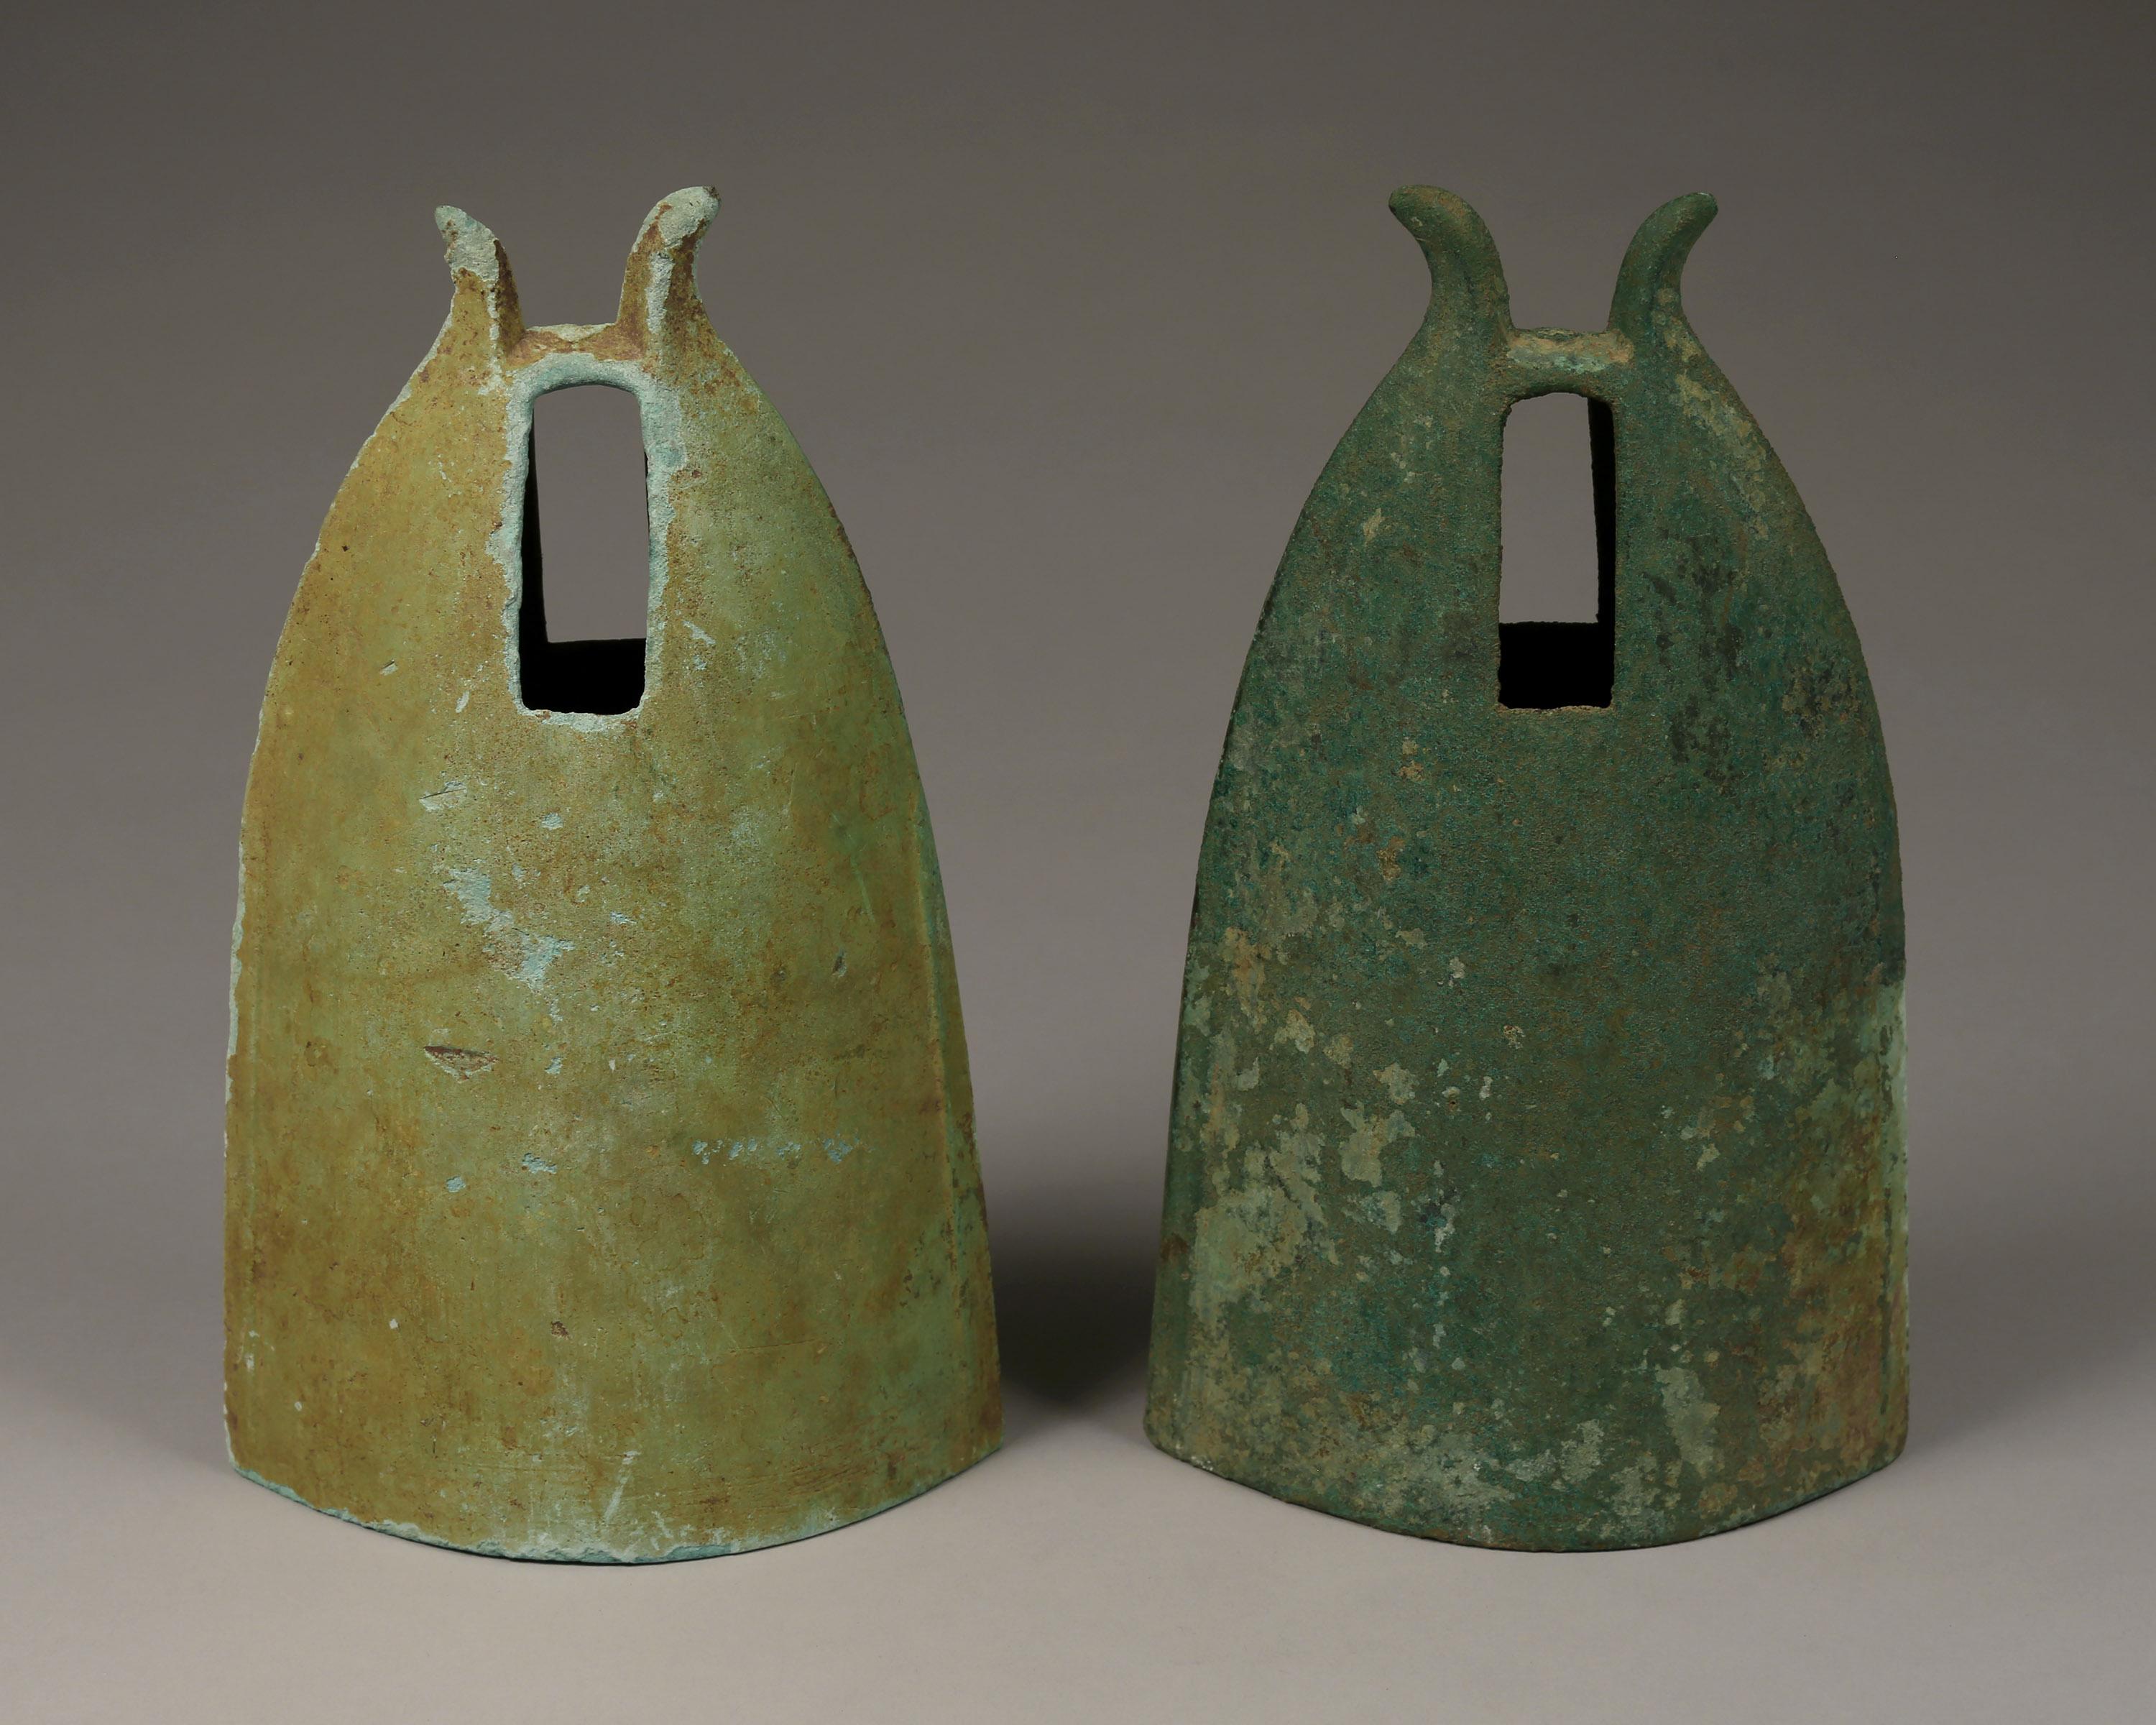 Pair of bronze bells from the Dong Son Culture (circa 1000 BC-200 AD).

Beautiful and variegated green patina.

The Dong Son culture was the first Bronze Age culture in South East Asia. From their base in Vietnam, their influence spread into